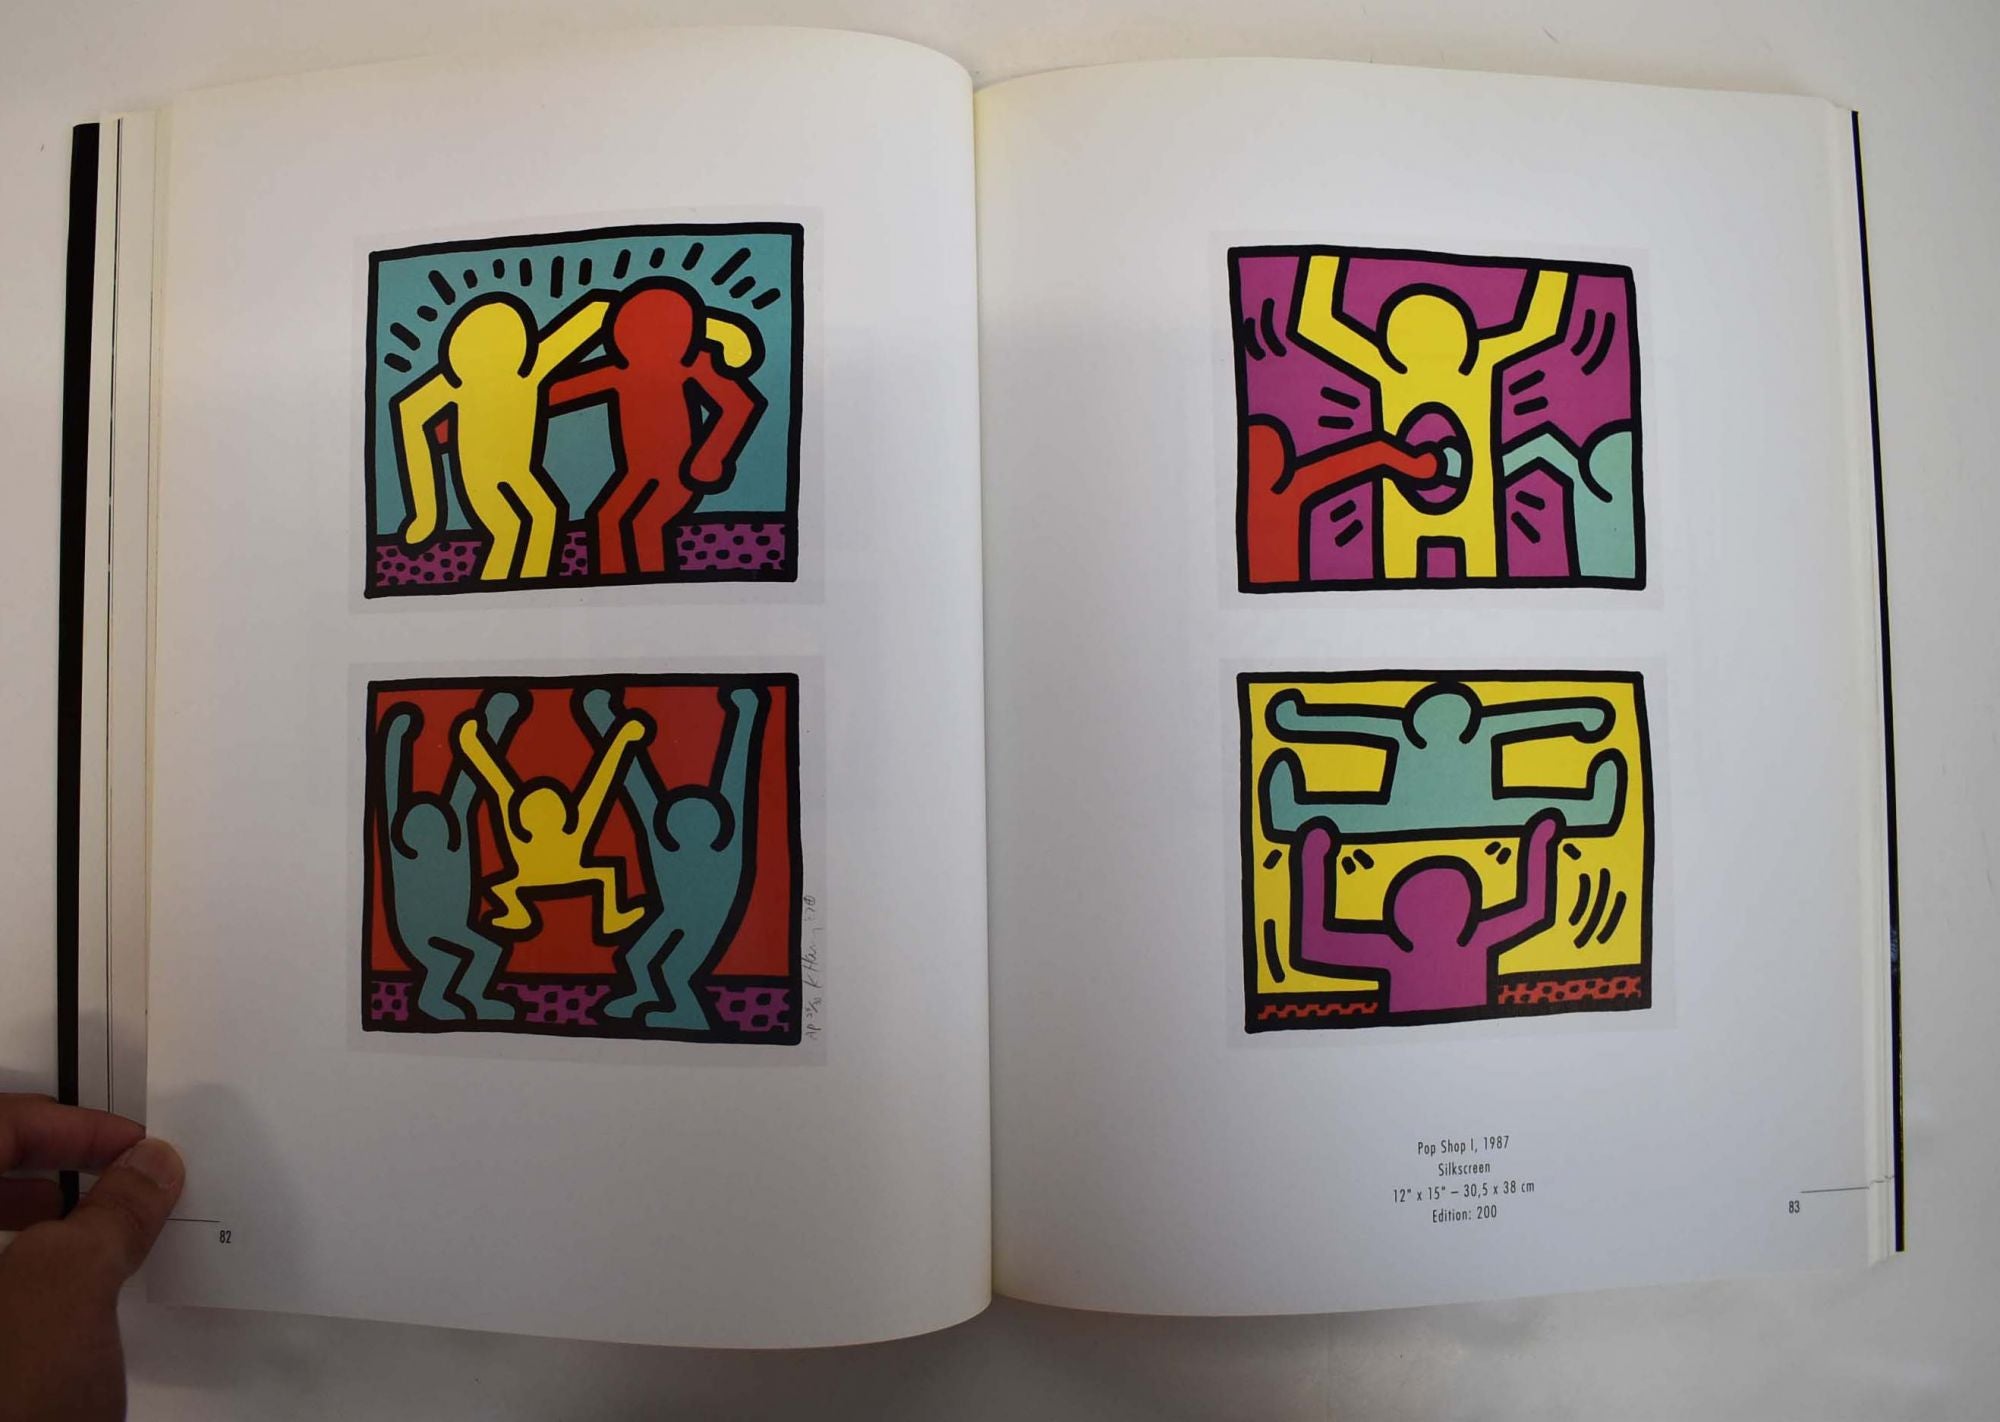 Keith Haring: Editions on Paper, 1982-1990: Das Druckgraphische 